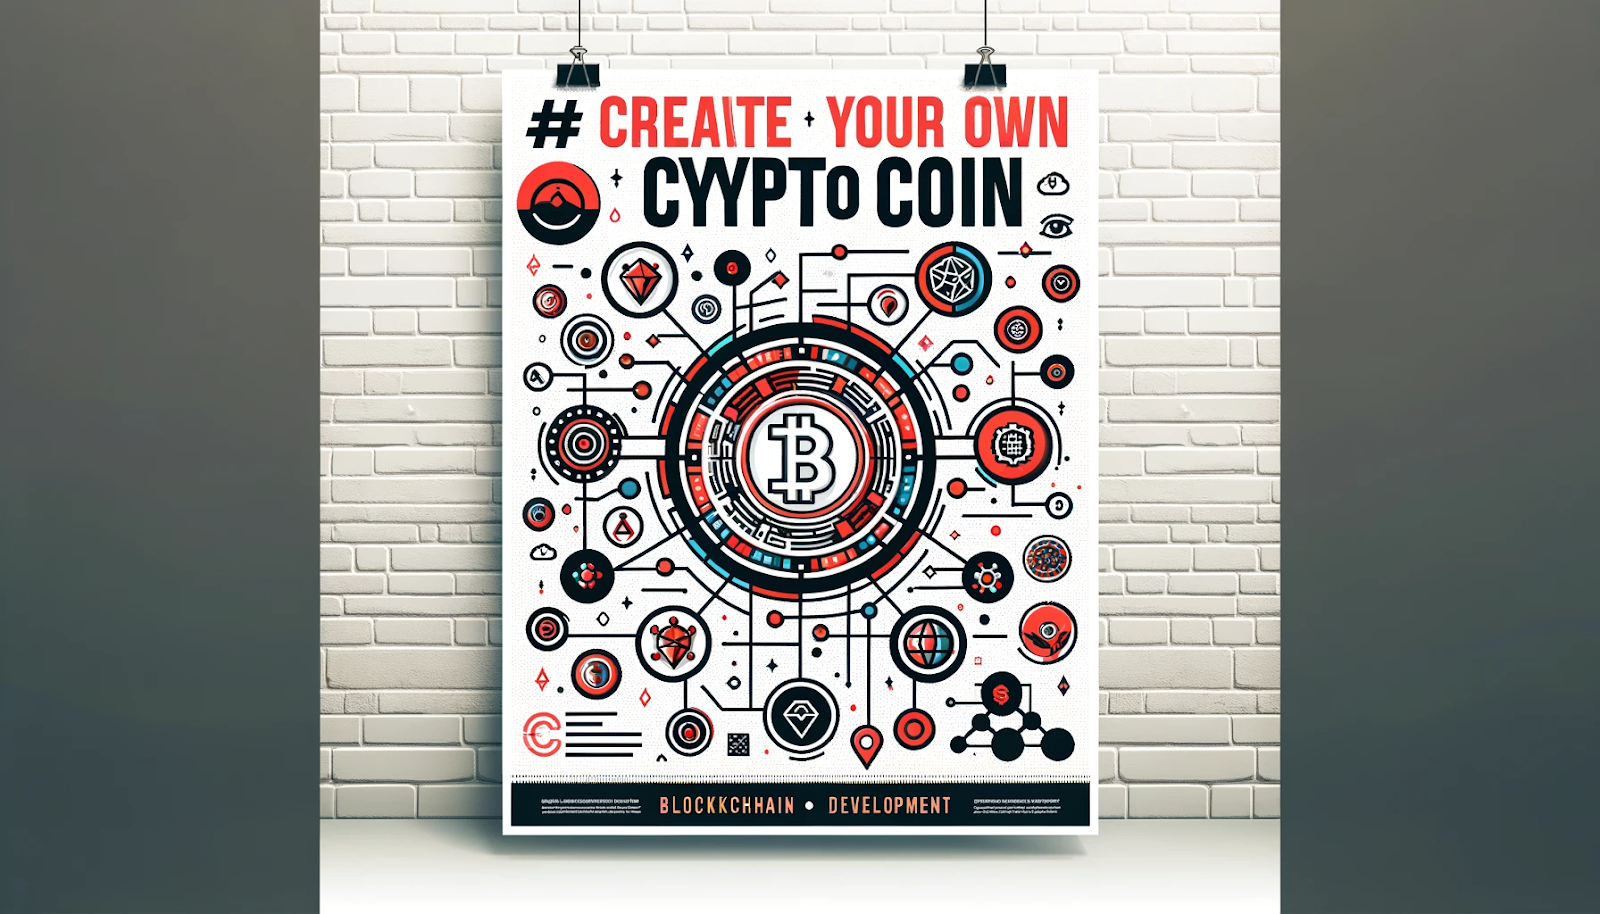 Learn How to Create Your Own Crypto Coin Today